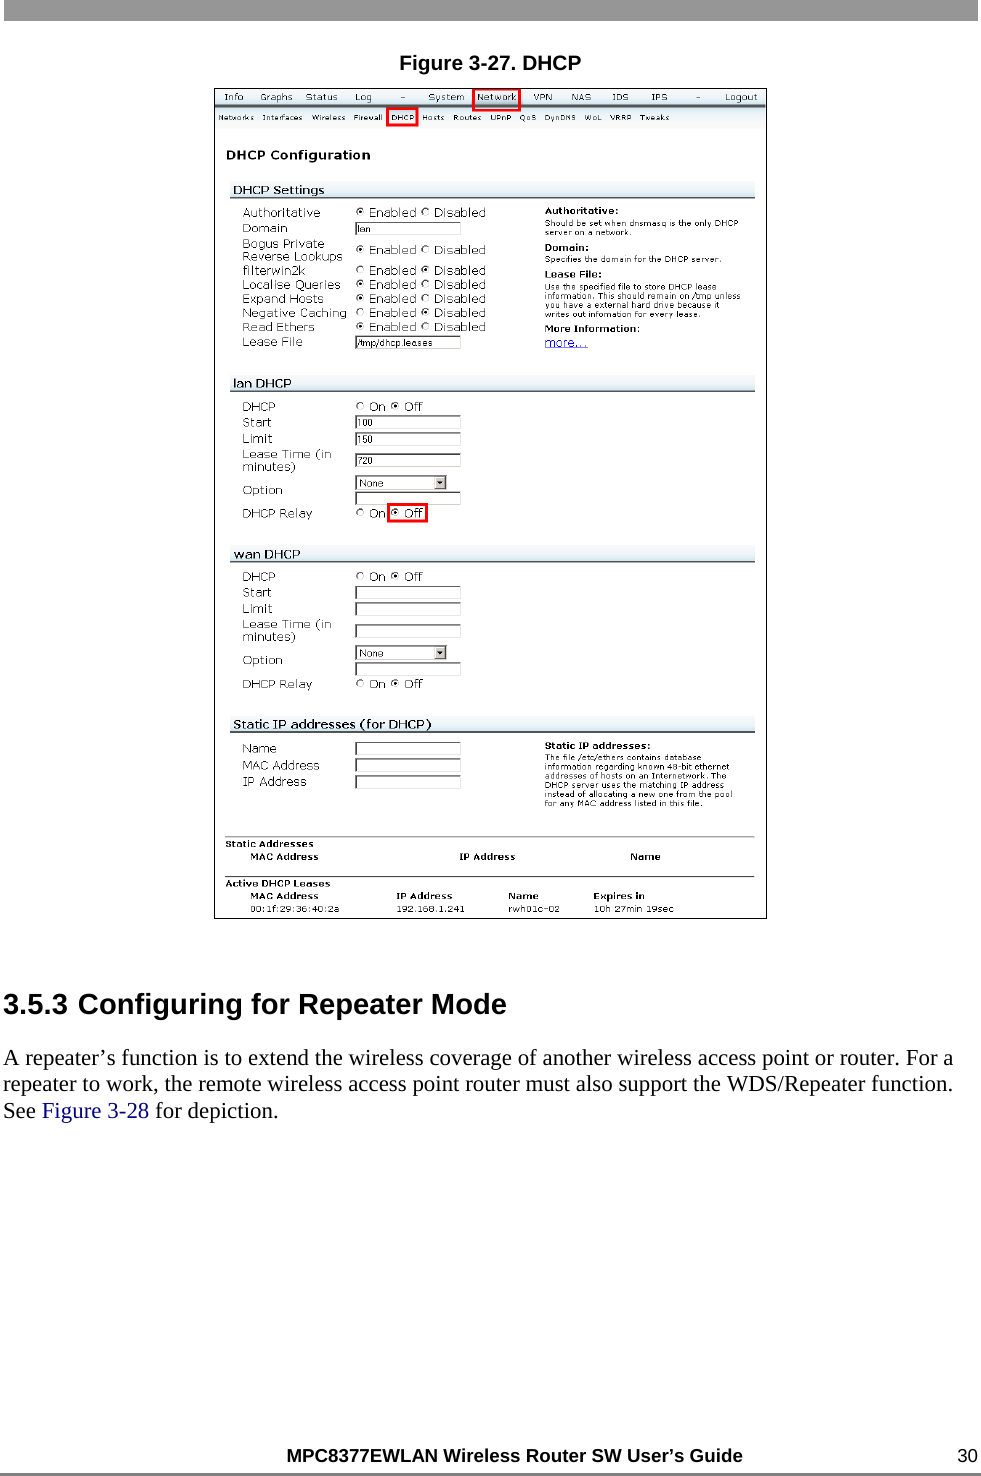                                                          MPC8377EWLAN Wireless Router SW User’s Guide    30 Figure 3-27. DHCP  3.5.3 Configuring for Repeater Mode A repeater’s function is to extend the wireless coverage of another wireless access point or router. For a repeater to work, the remote wireless access point router must also support the WDS/Repeater function. See Figure 3-28 for depiction. 